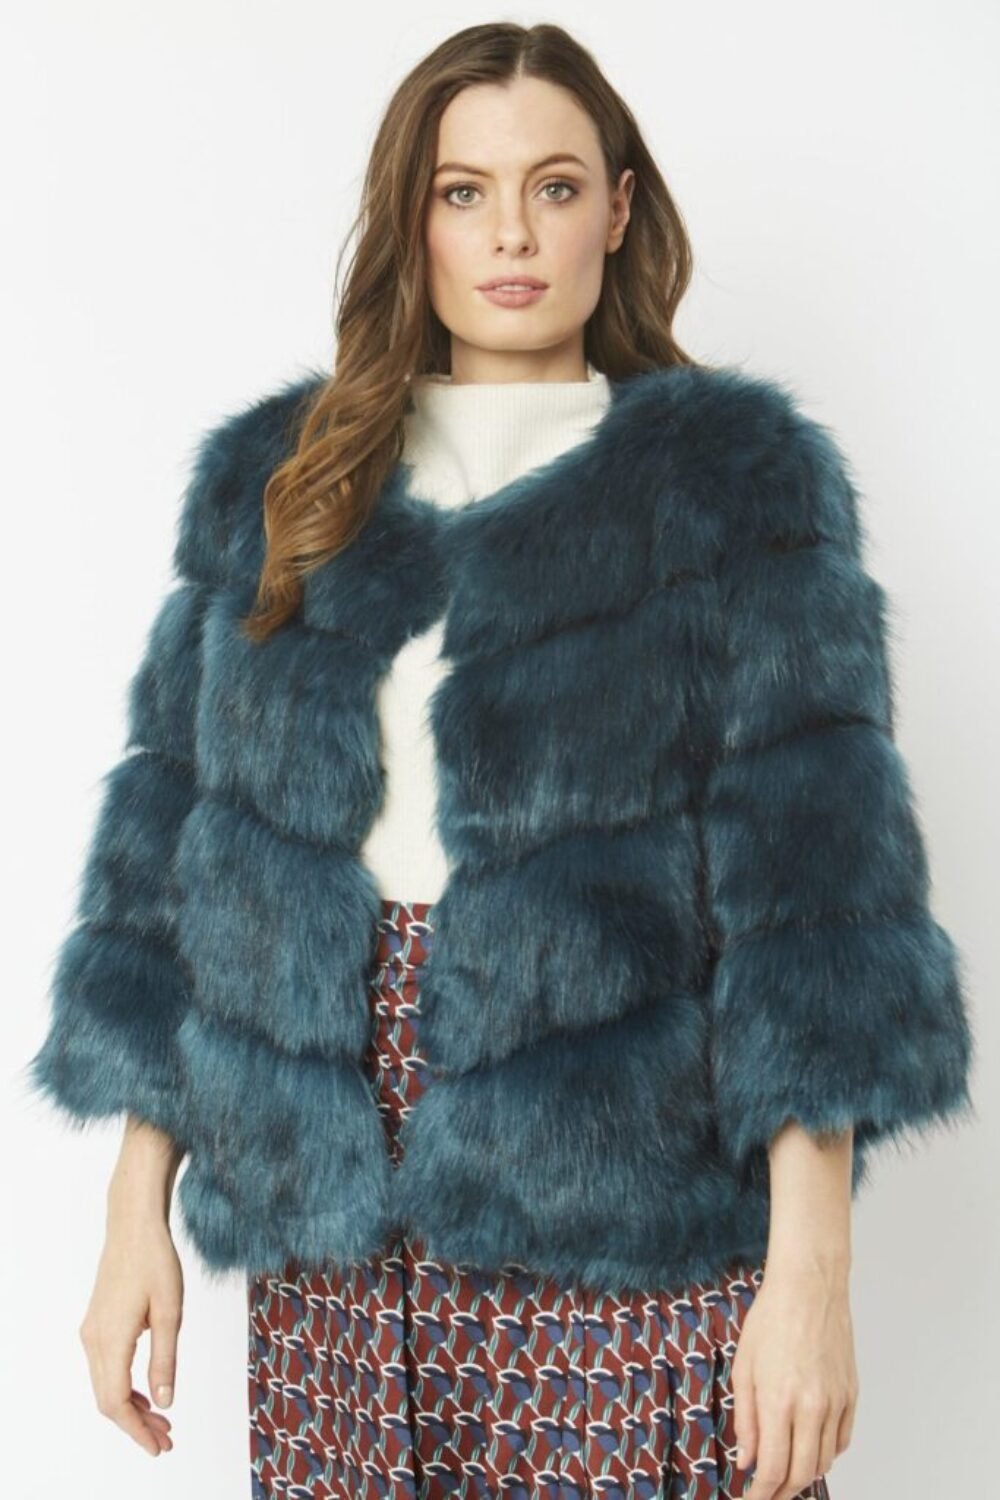 Shop Lux Teal Faux Fur Ella Coat and women's luxury and designer clothes at www.lux-apparel.co.uk